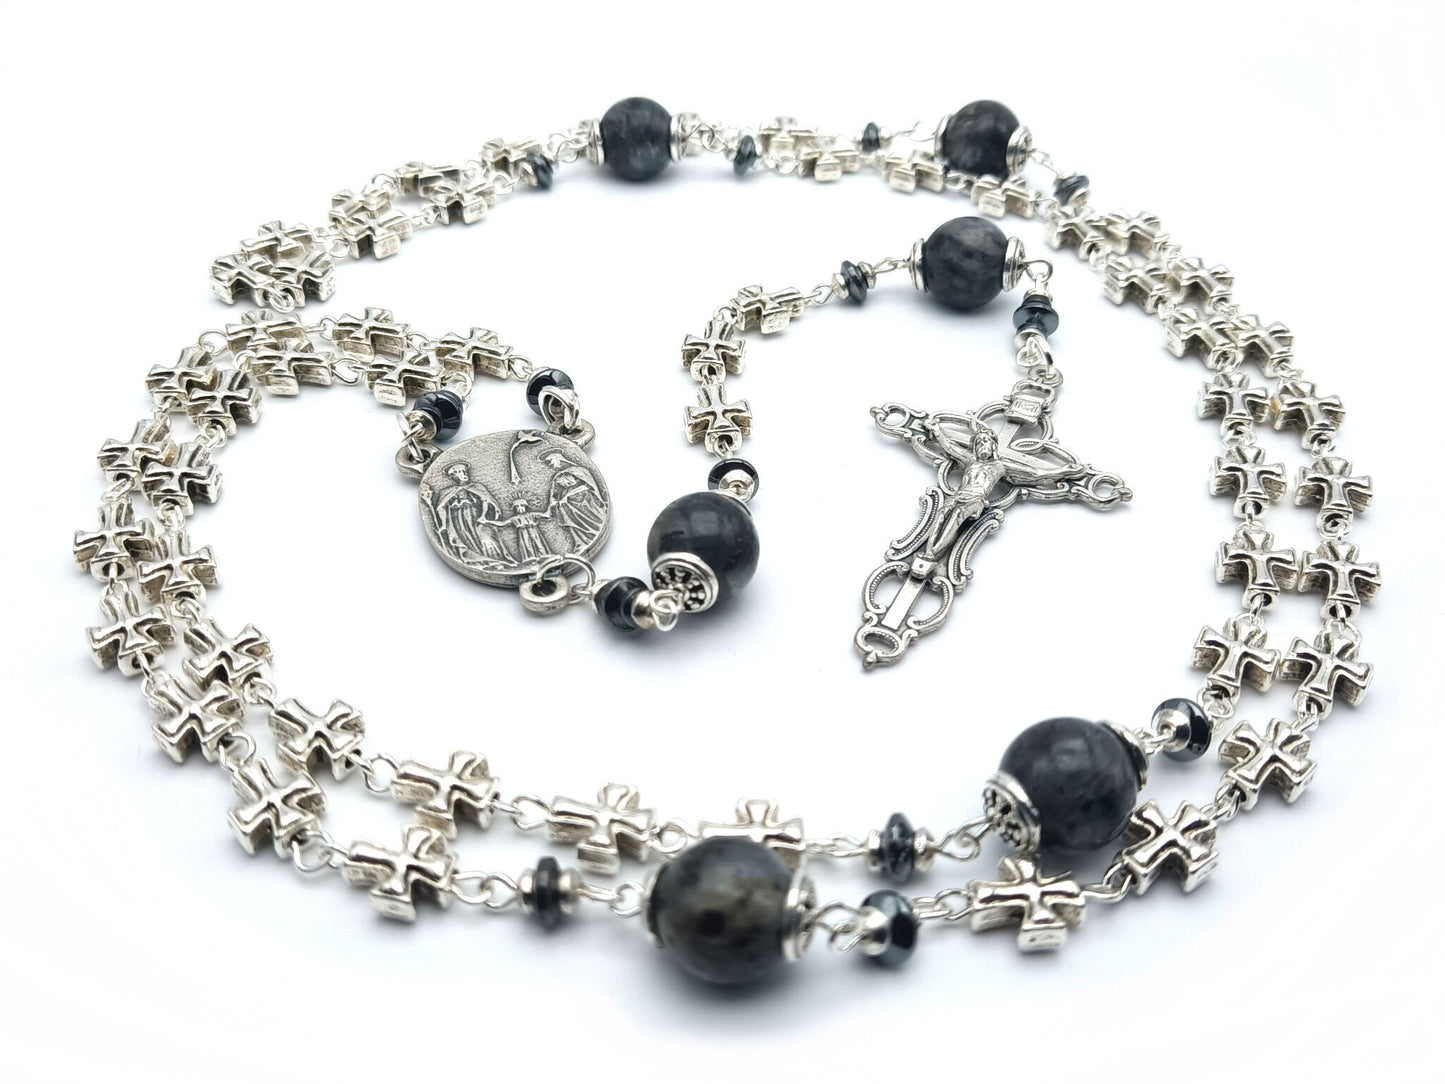 Three hearts of Jesus, Mary and Joseph unique rosary beads with metal cross beads, dark grey gemstone pater beads, silver bead caps, crucifix and centre medal.